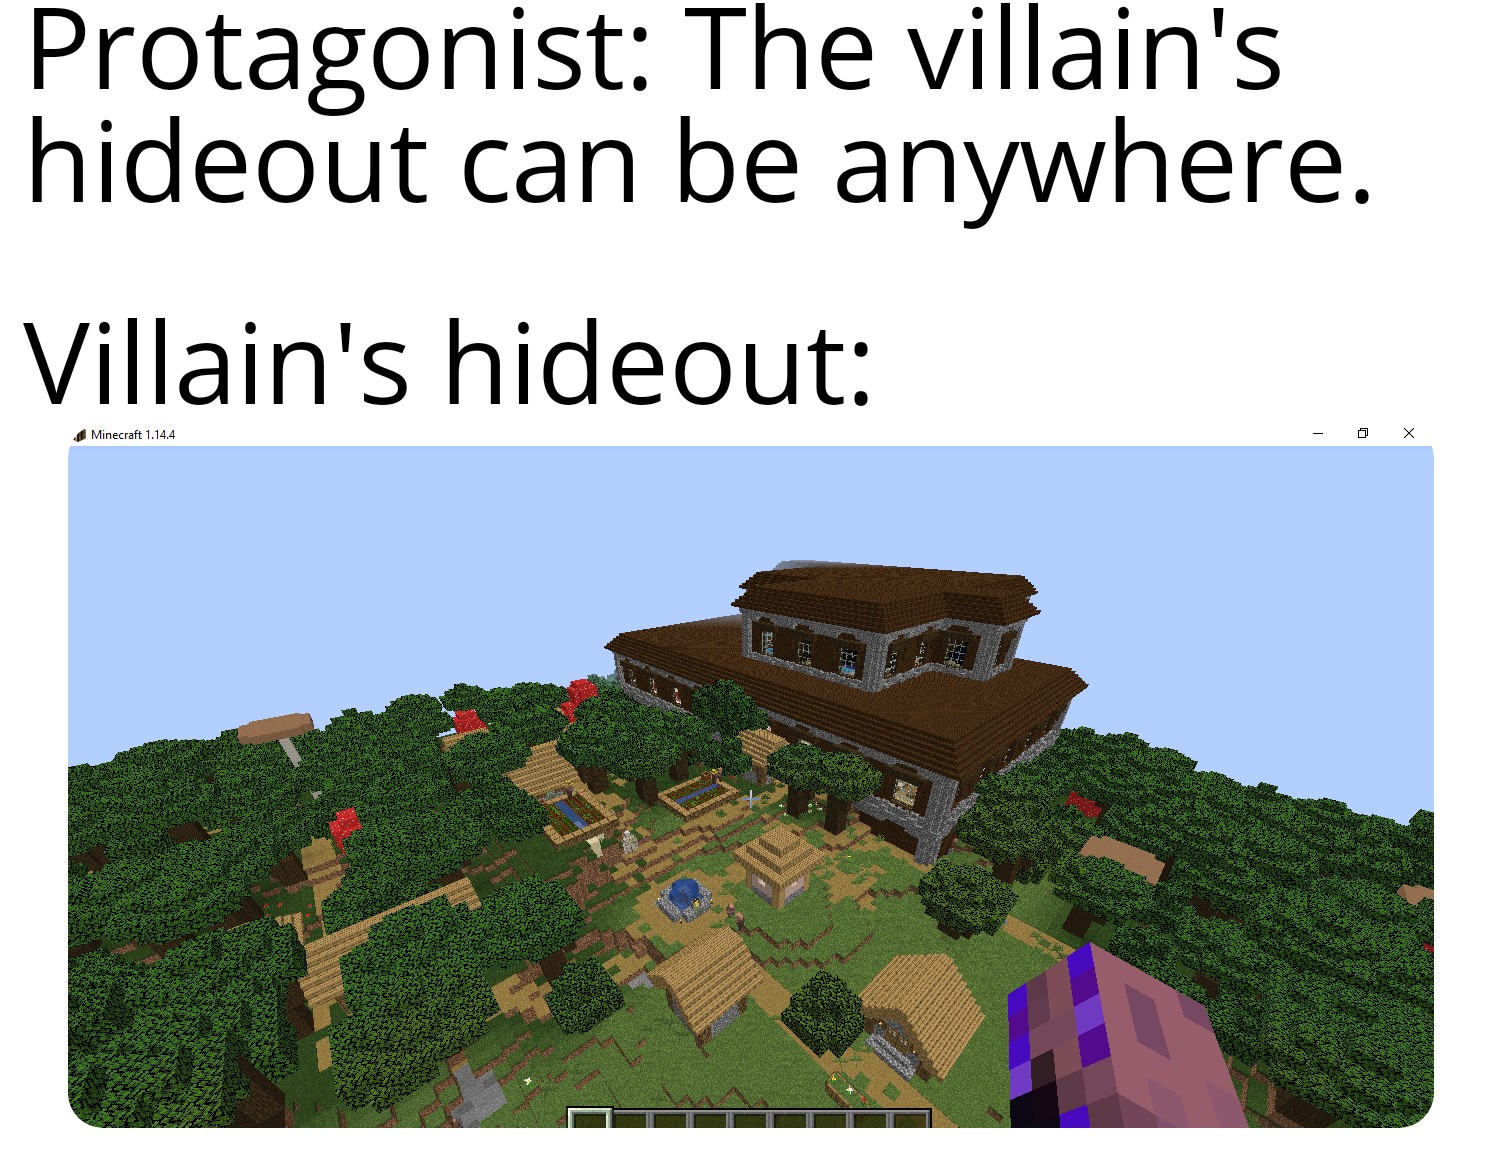 funny memes - water resources - Protagonist The villain's hideout can be anywhere. Villain's hideout